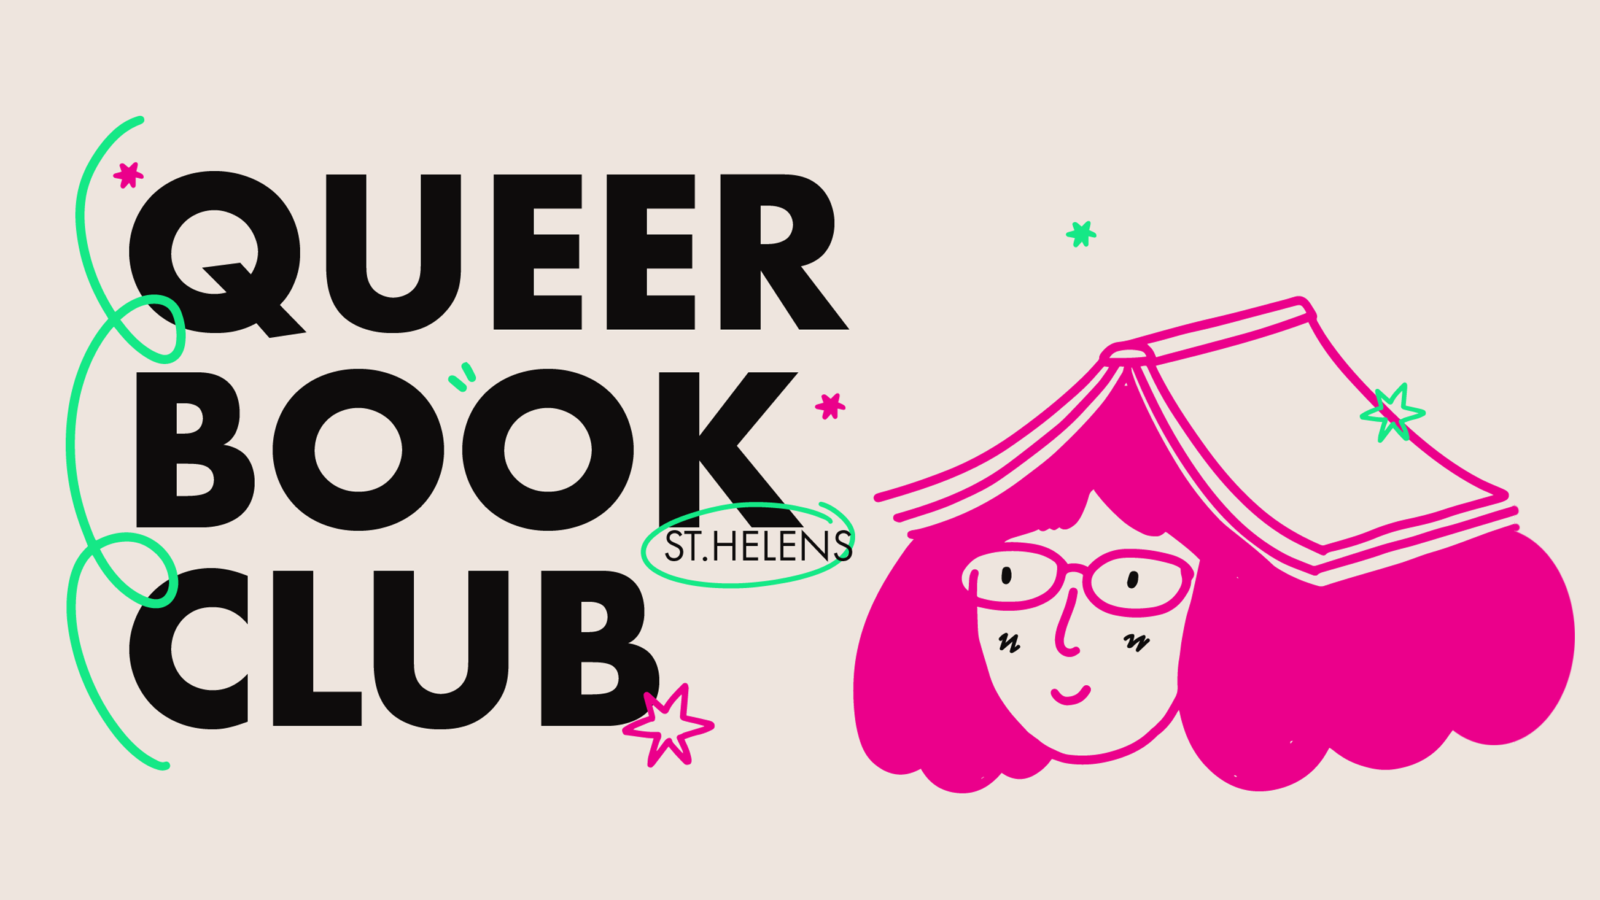 Illustration of a person with bright pink hair and glasses with a book open upside down on their head. The text next to it reads 'Queer Book Club'